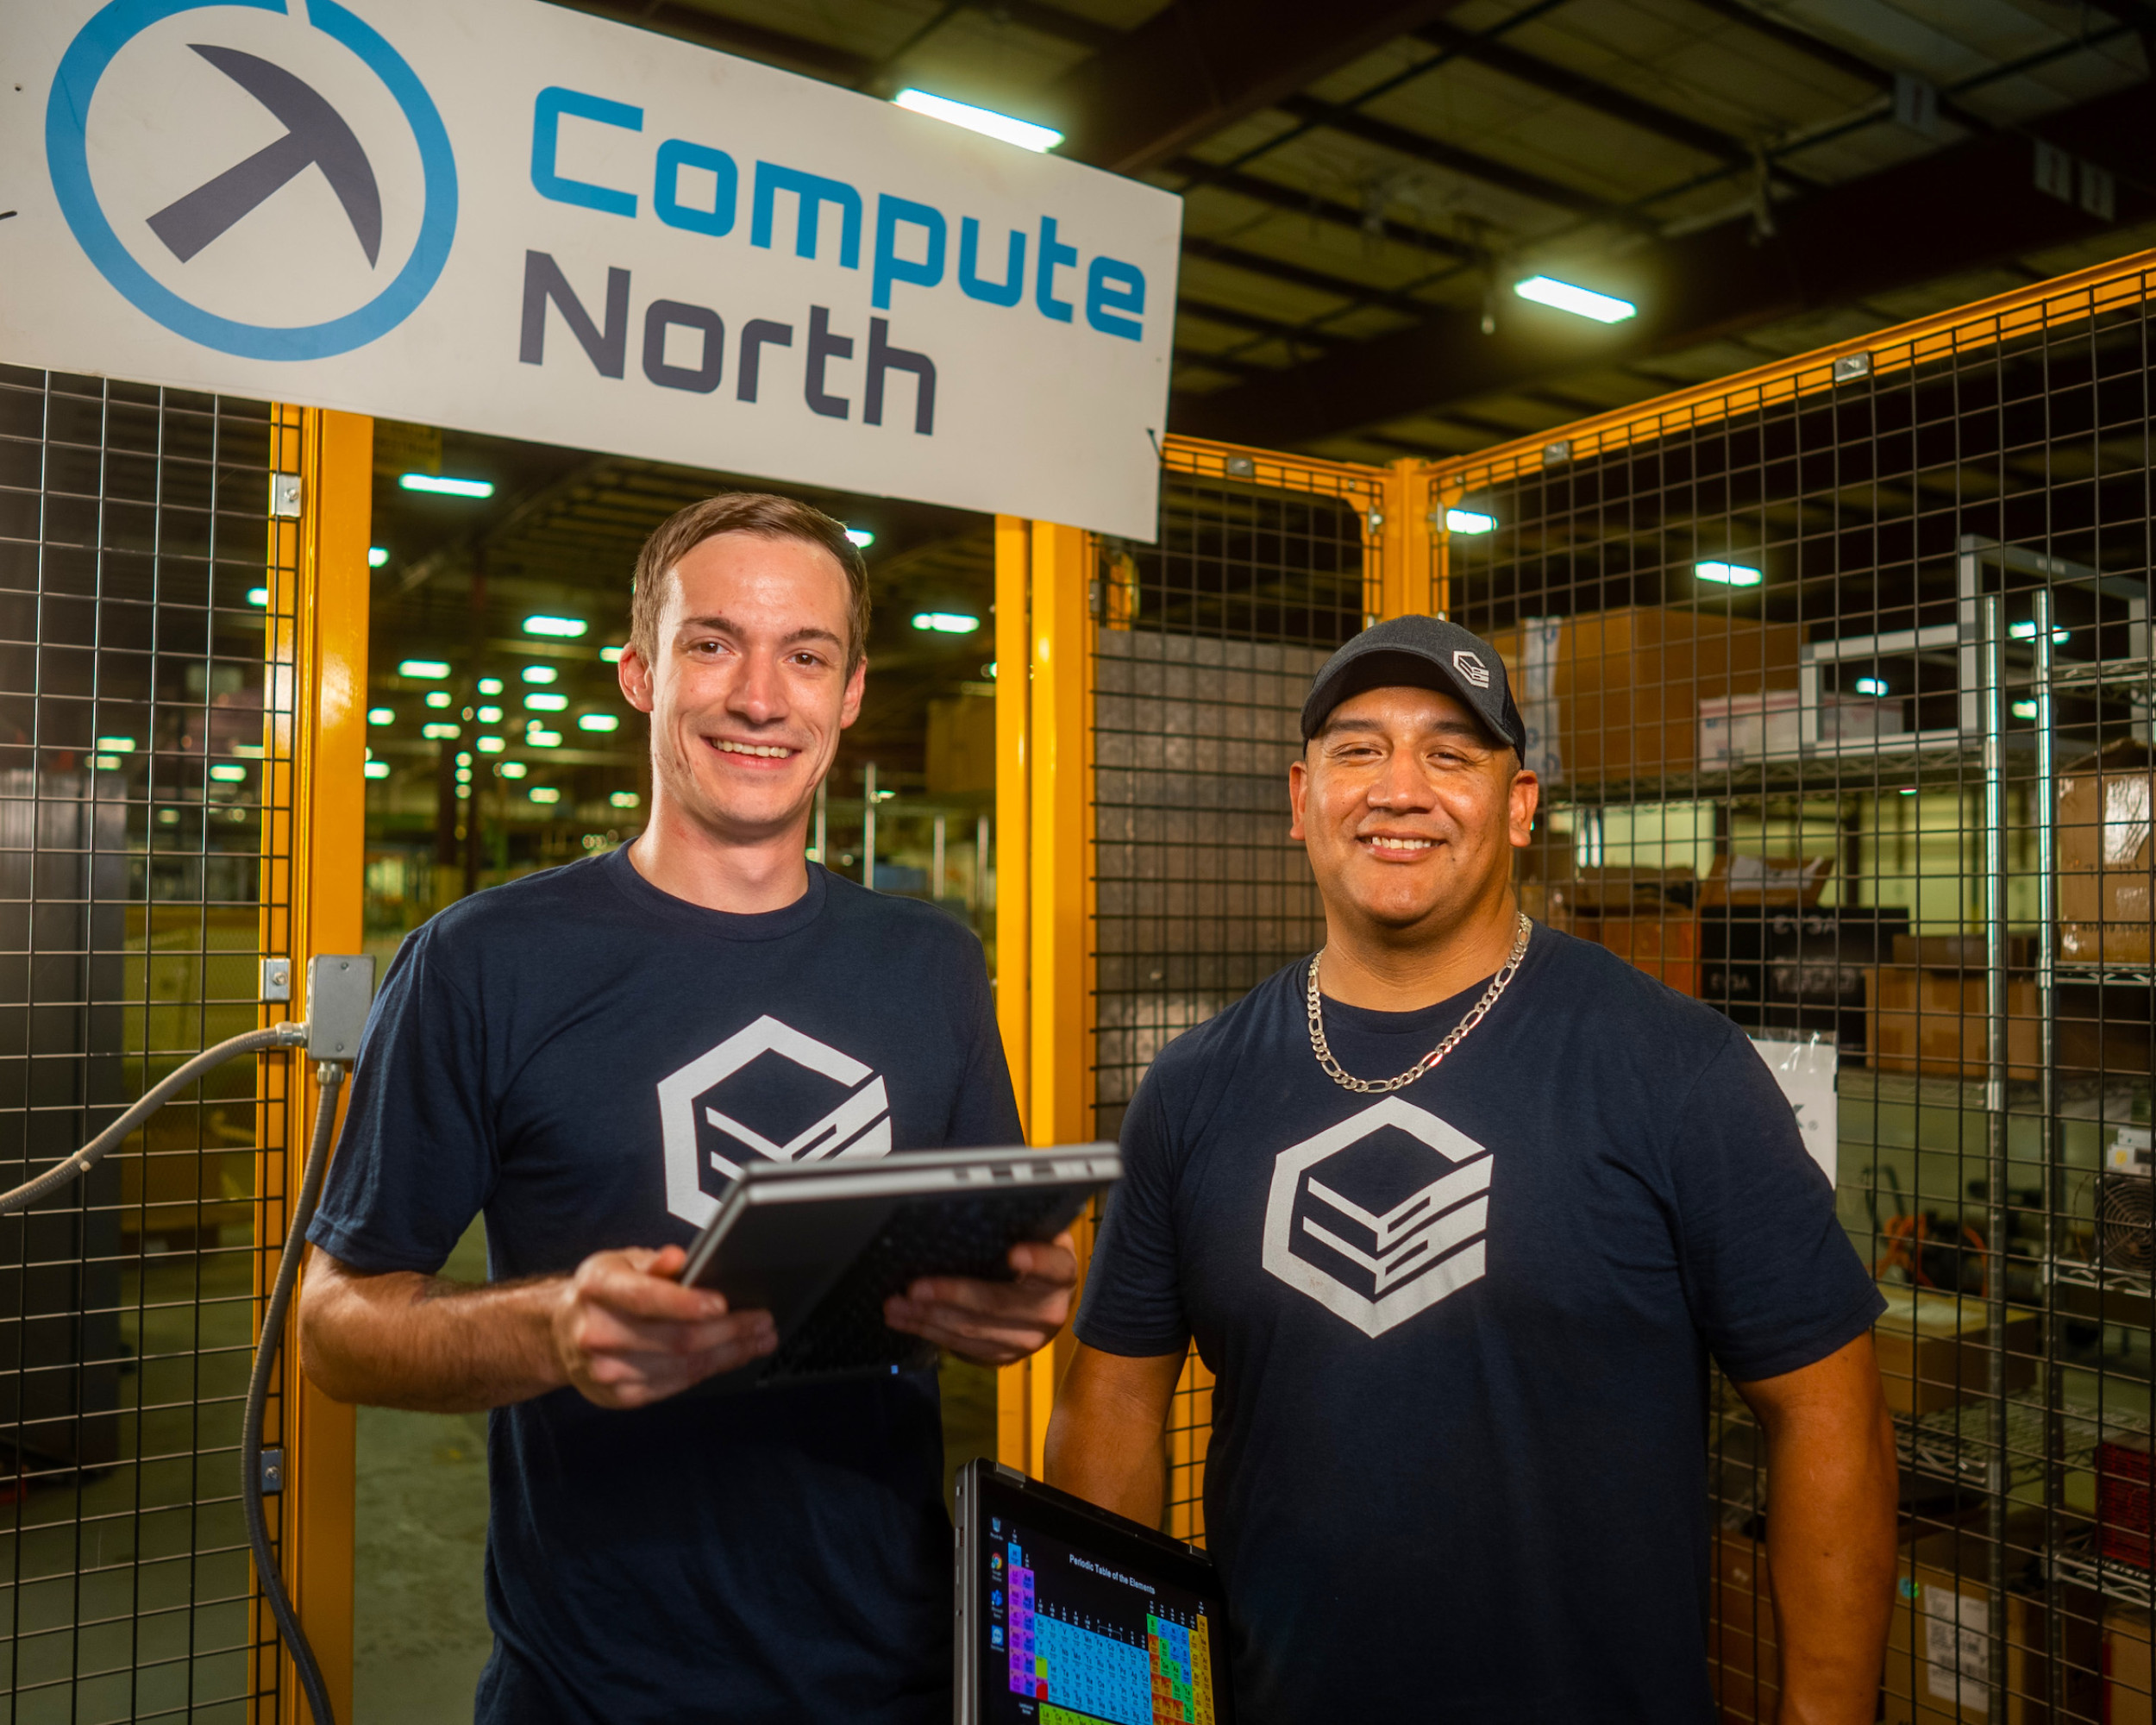 Two Compute North employees standing together